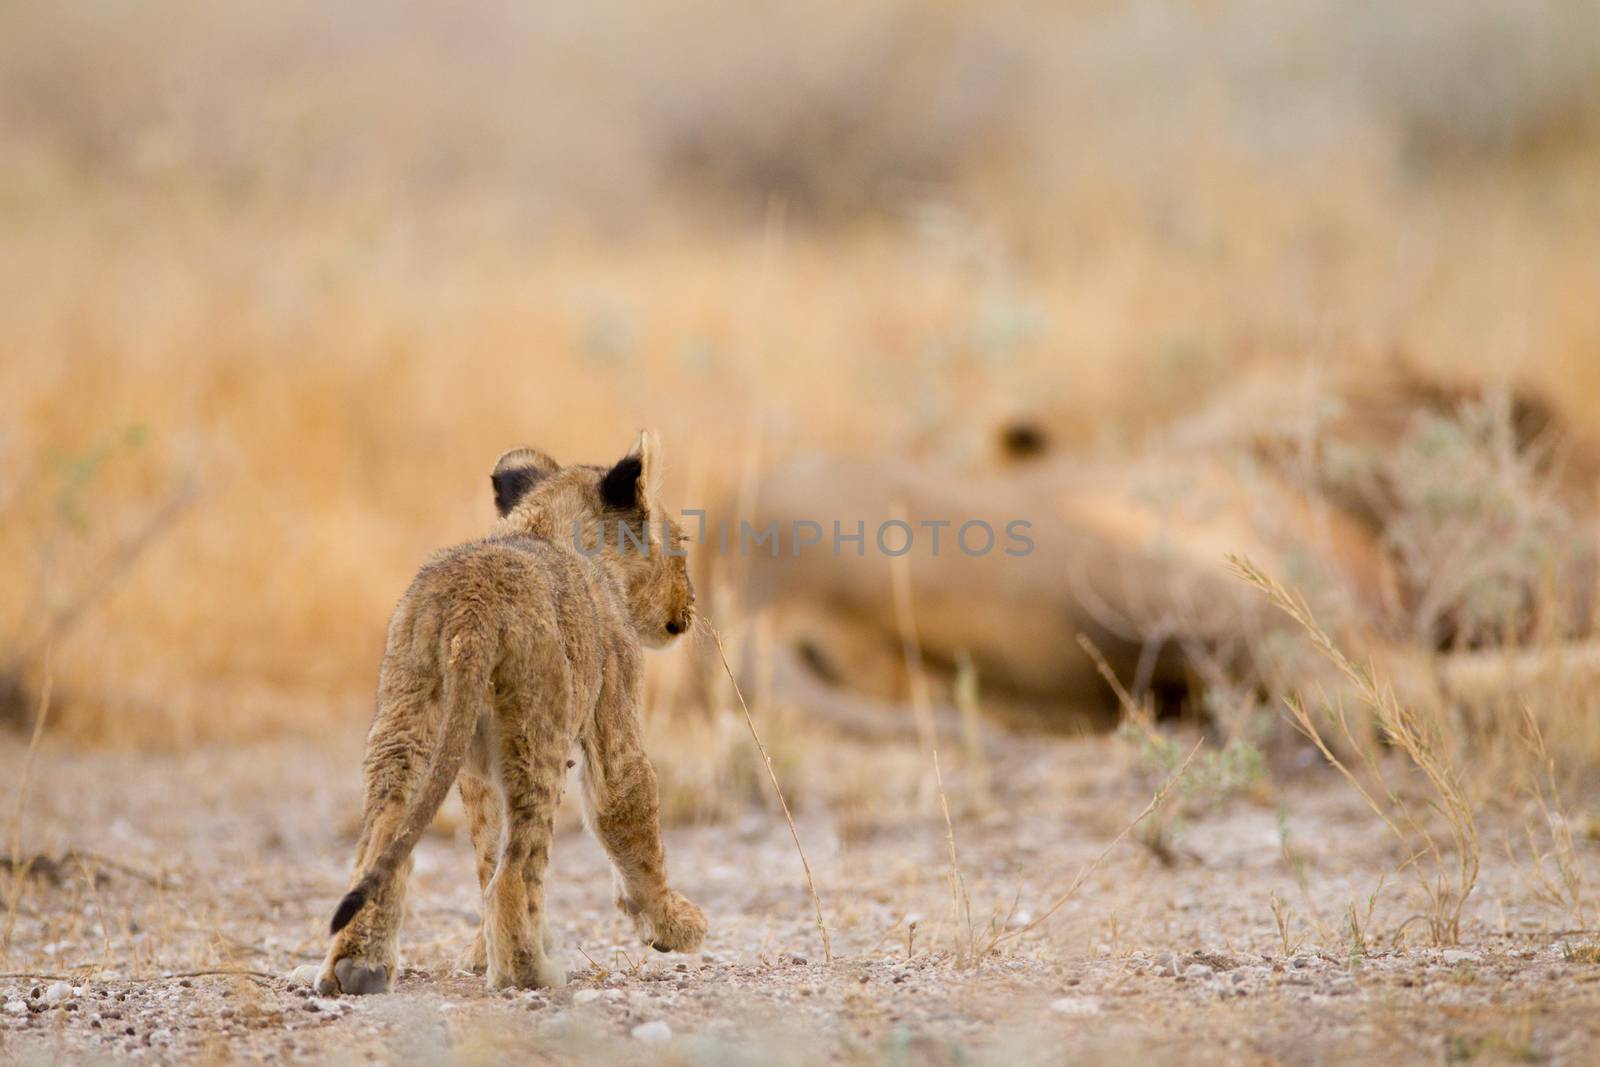 Lion cub in the wilderness of Africa